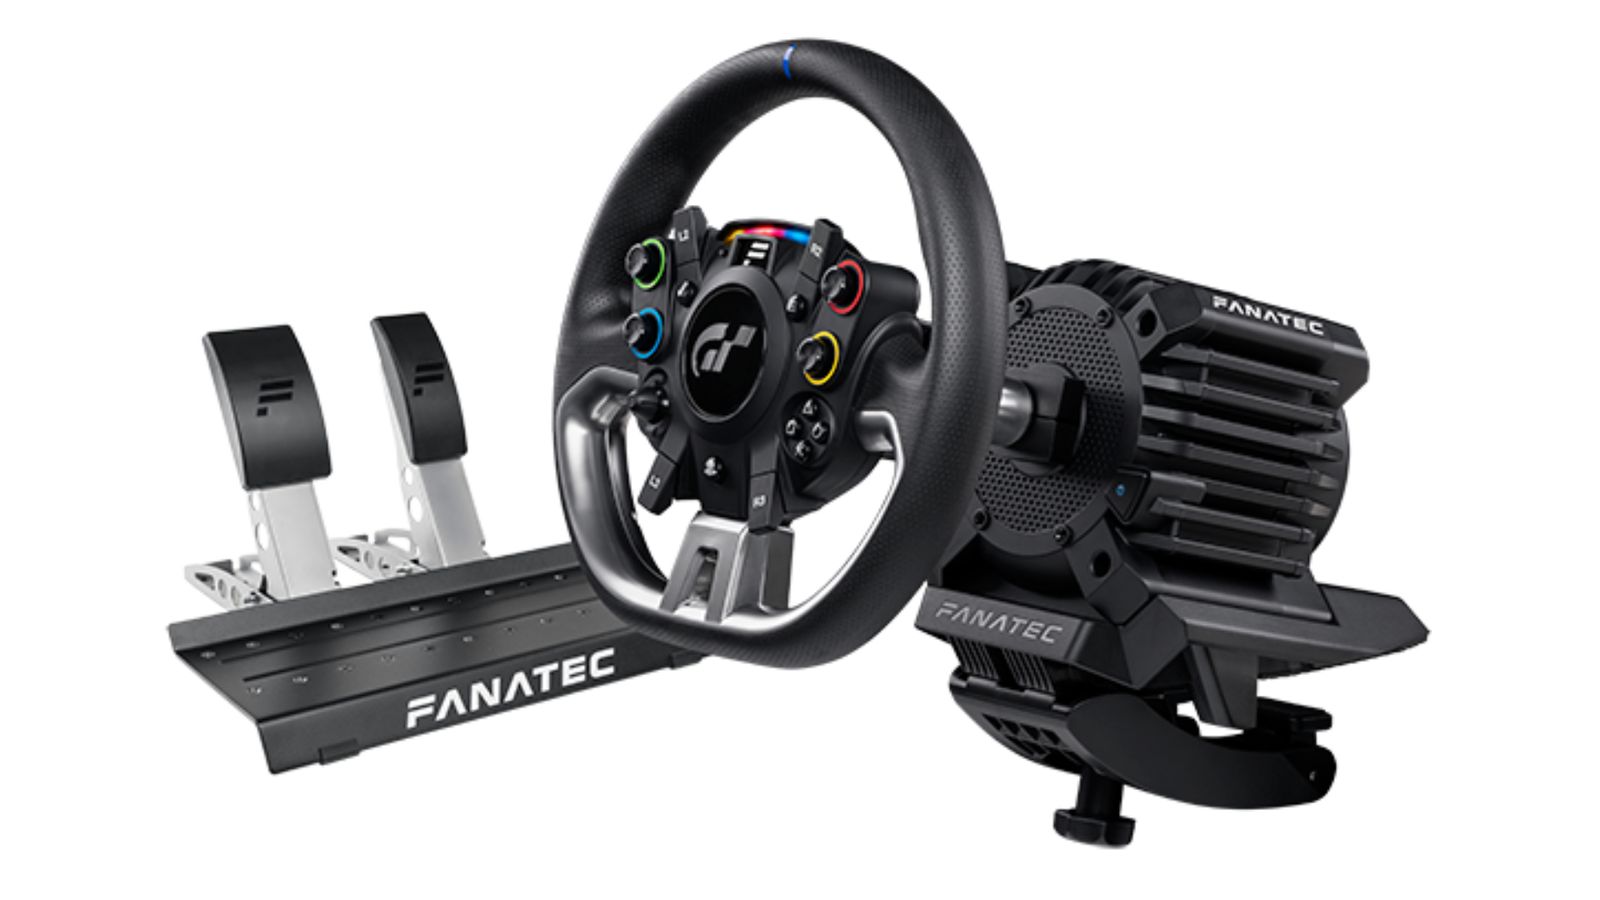 Fanatec Gran Turismo DD Pro product image of a black and dark grey racing wheel next to a set of silver and black pedals.